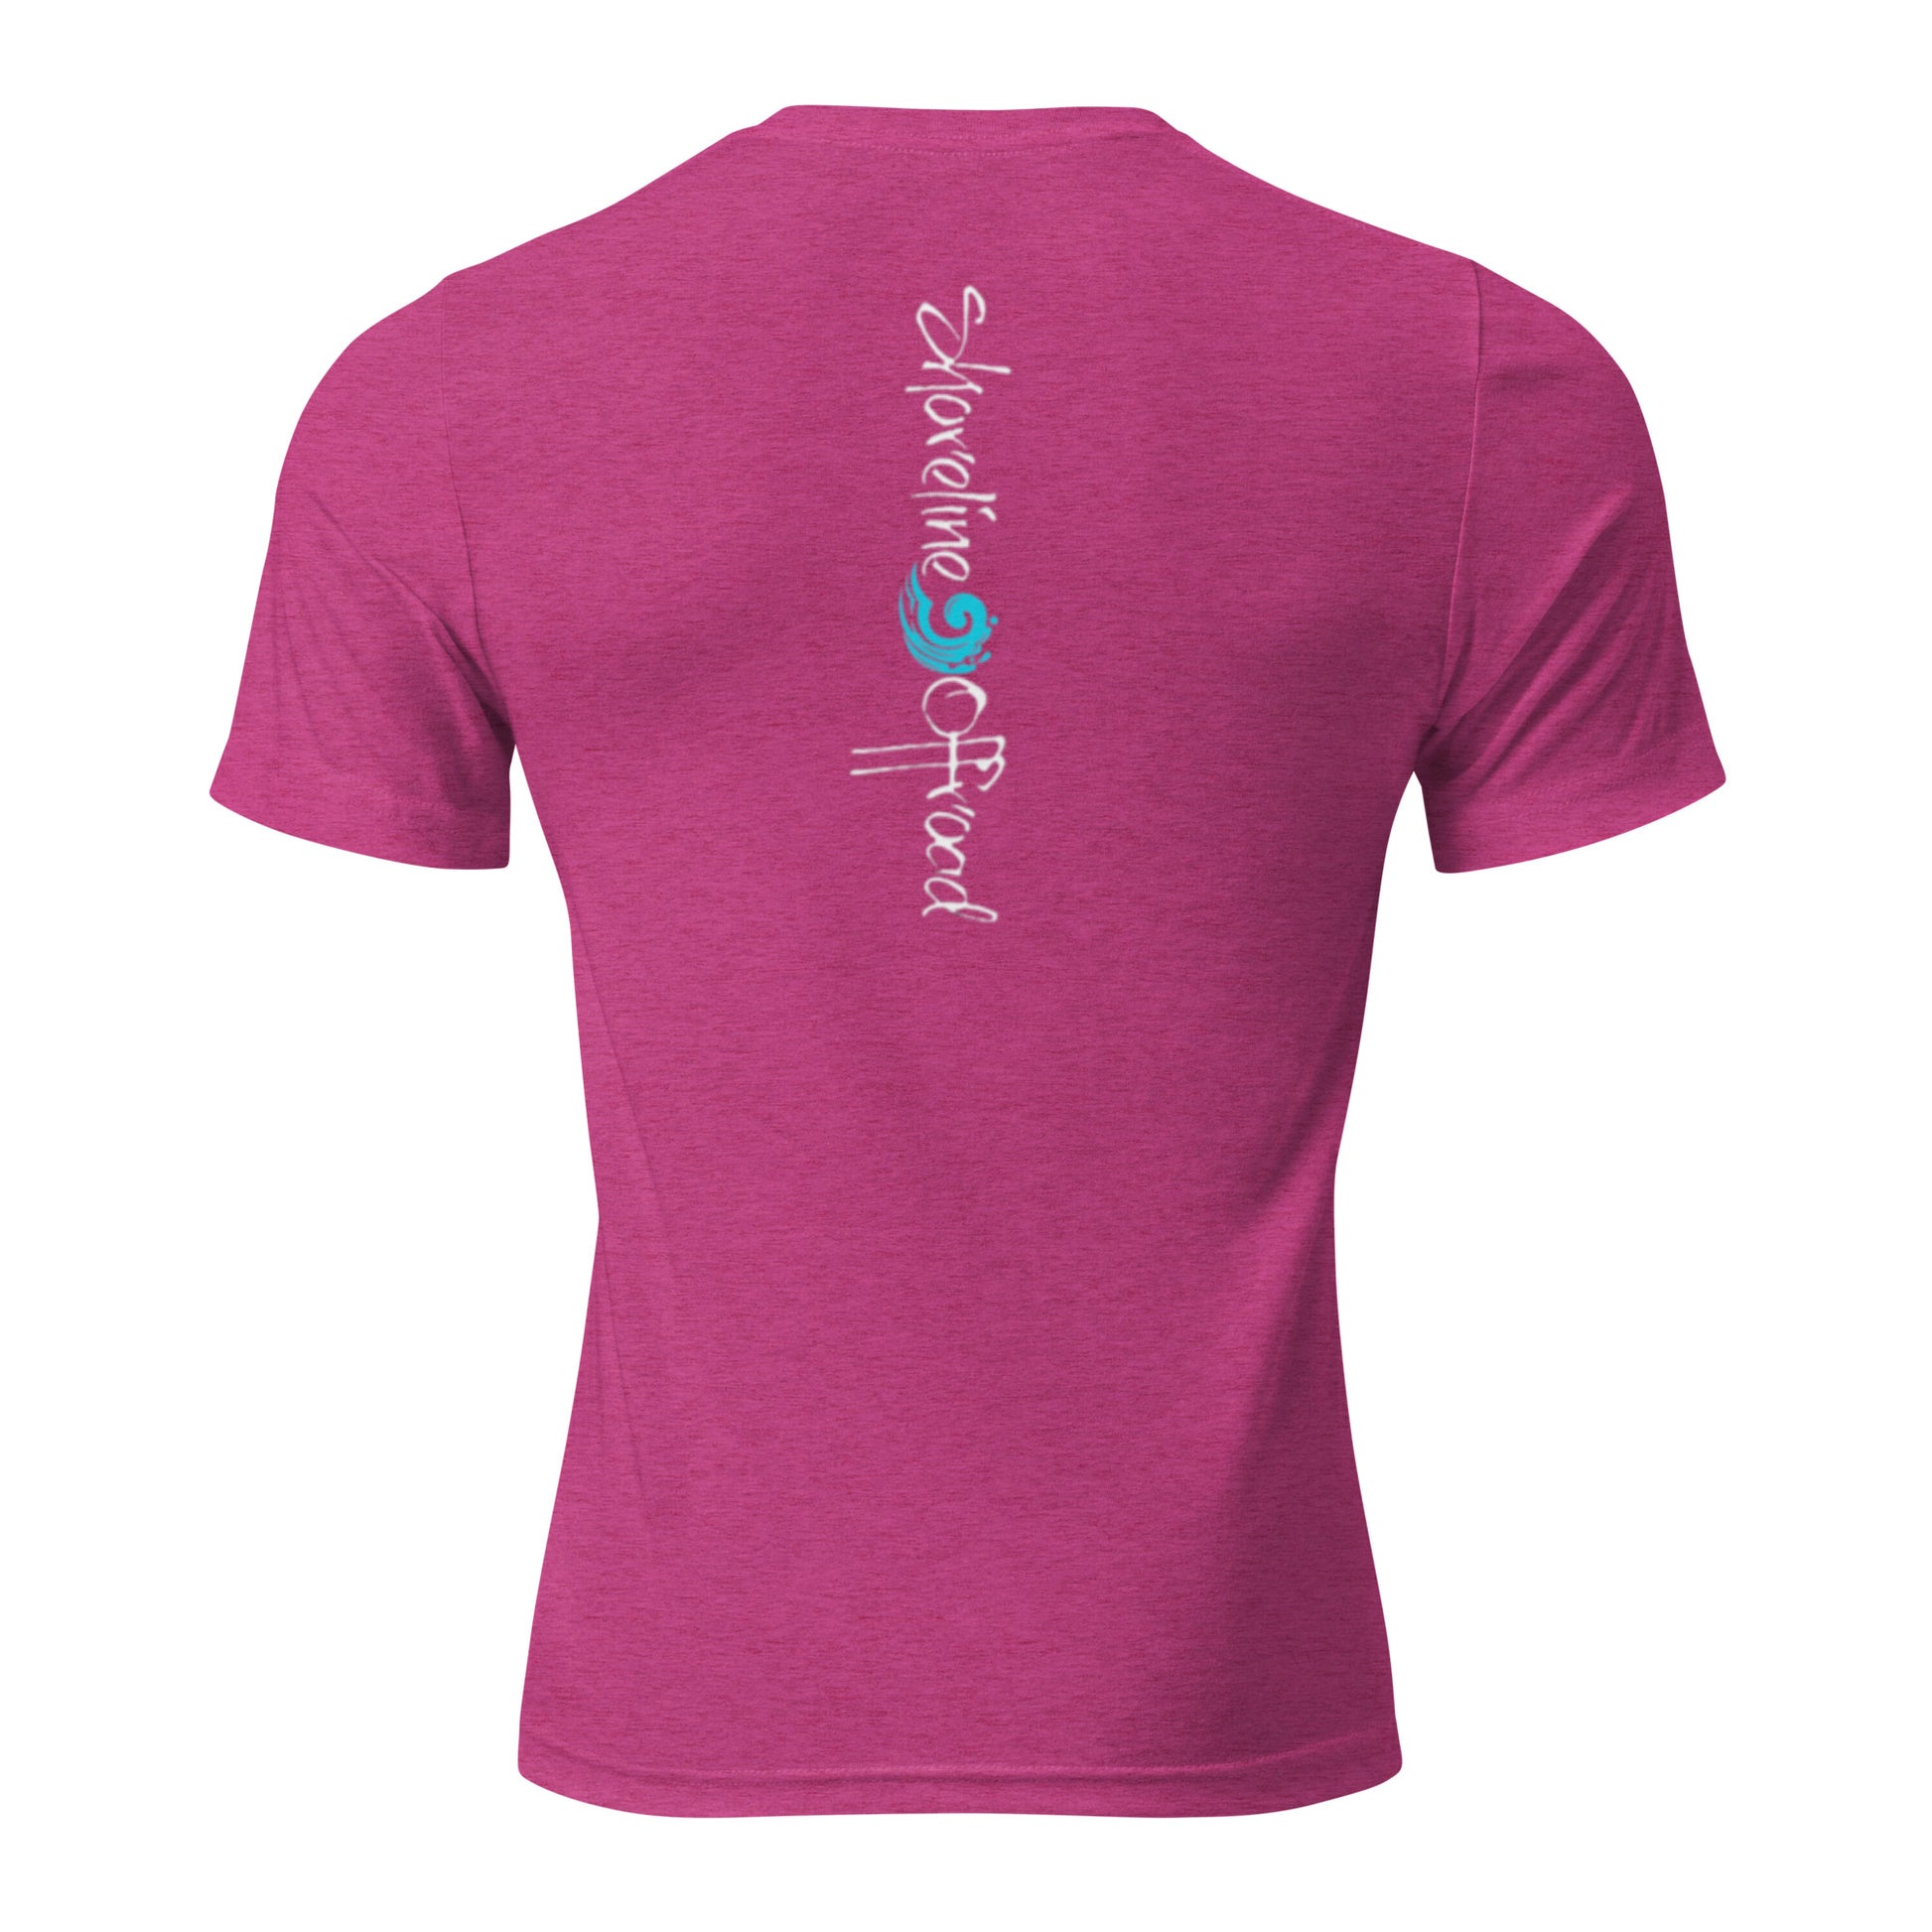 the back of a pink shirt with a blue and white logo on it